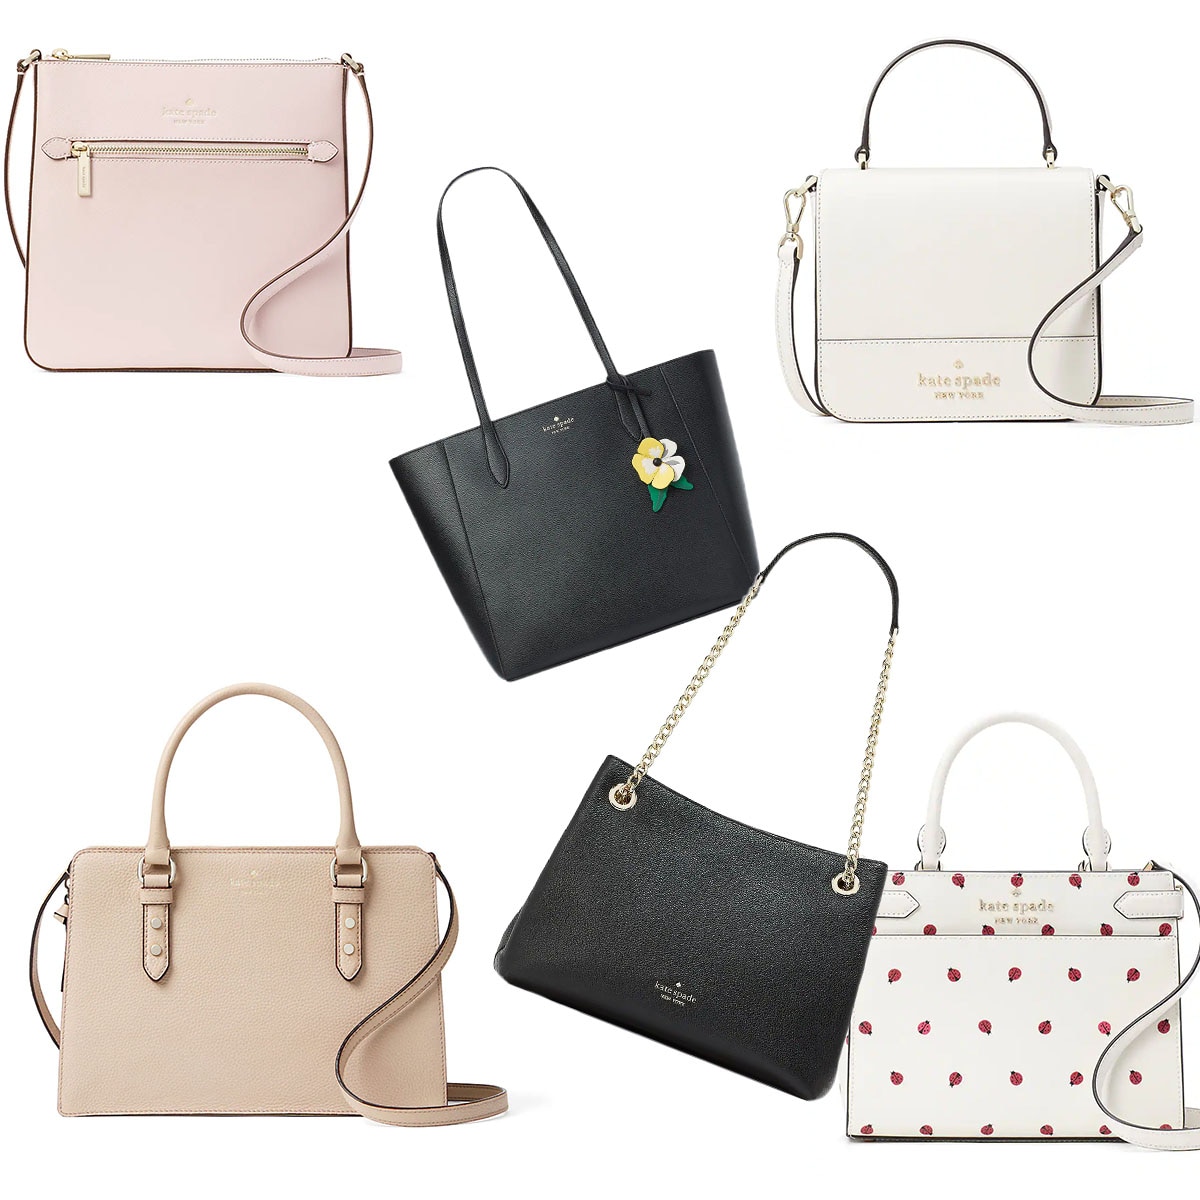 Kate Spade Outlet sale: Up to 70% off bags, boots, jewelry, more -  cleveland.com